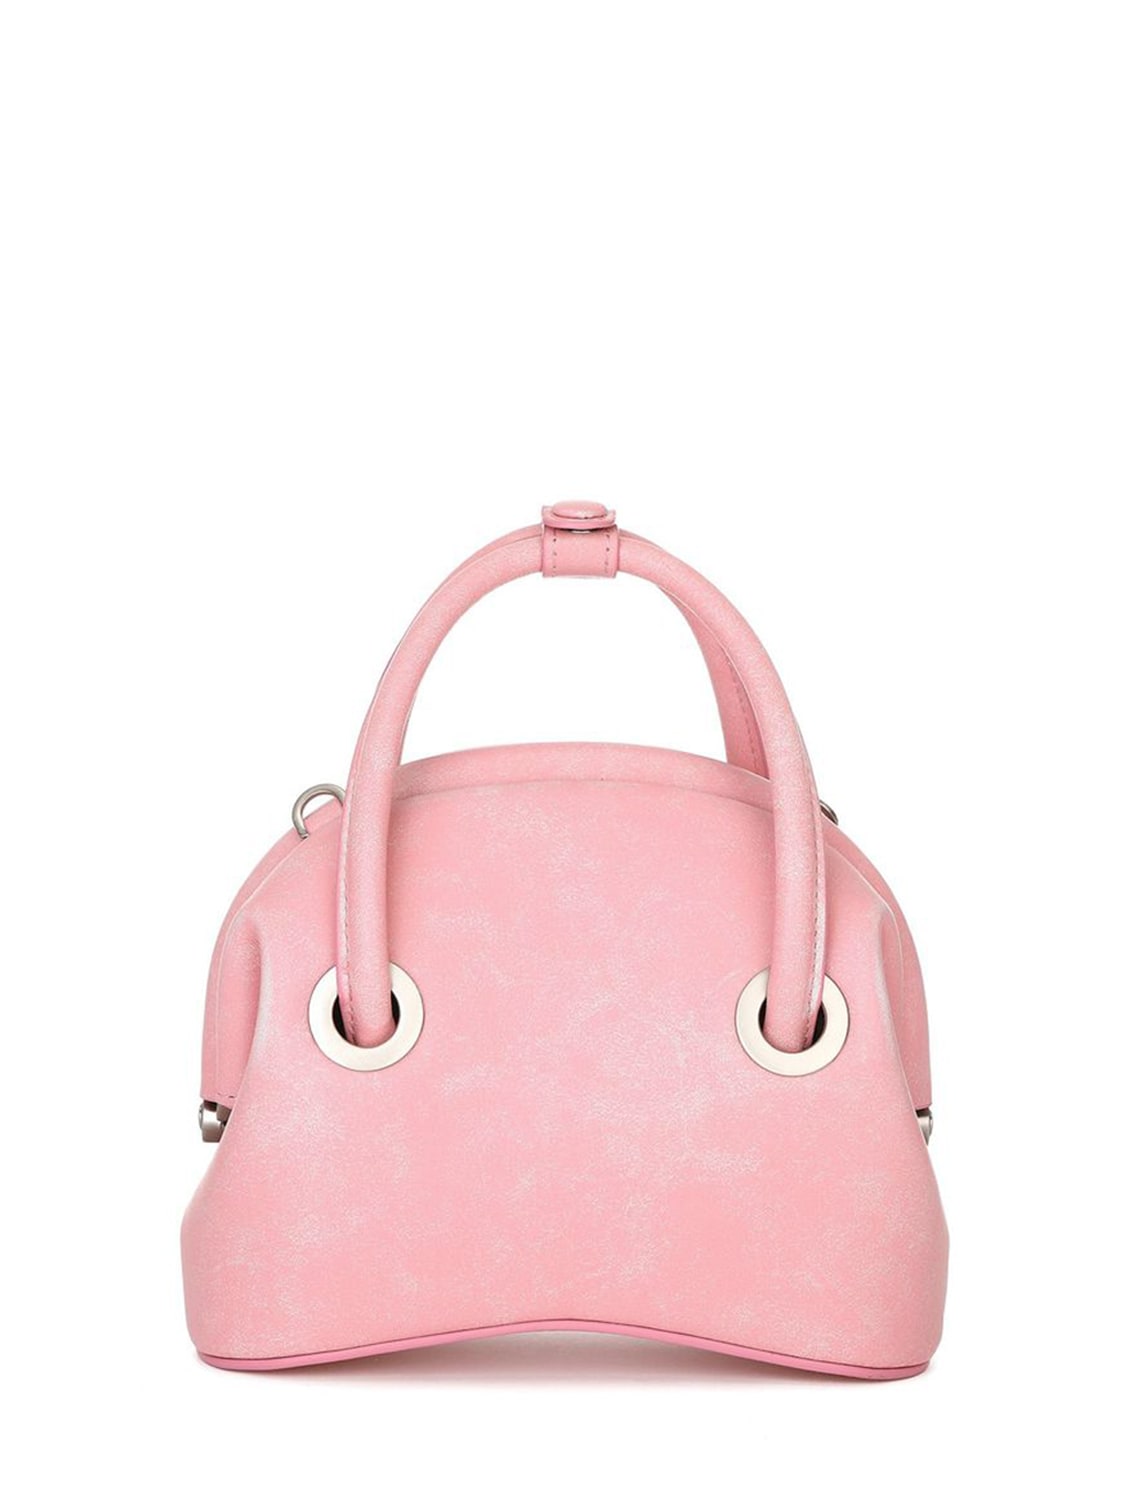 Osoi Mini Circle Leather Top Handle Bag In Vintage Pink